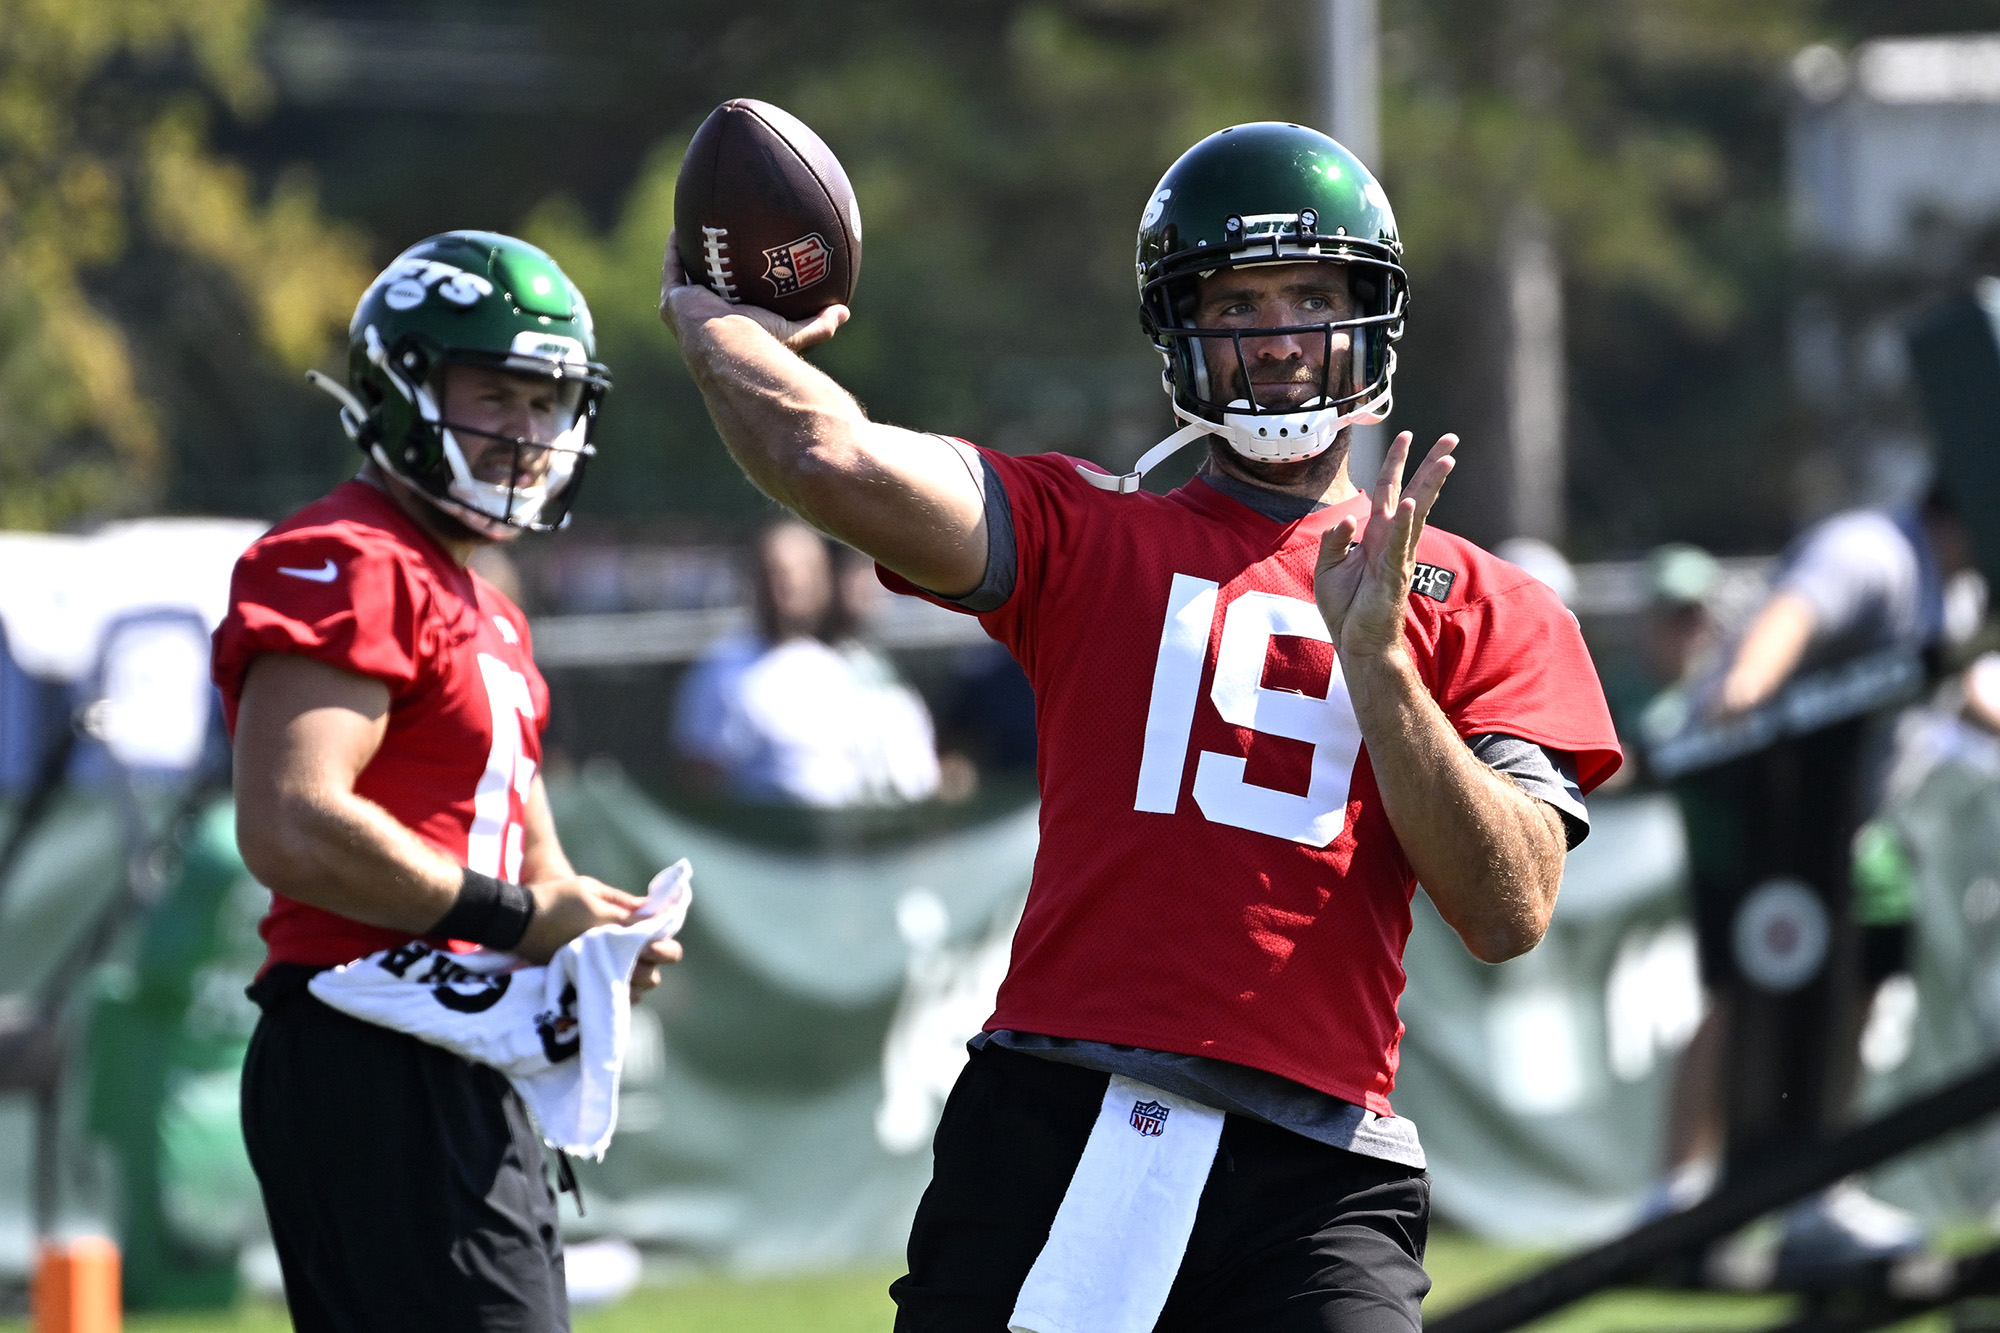 Joe Flacco throws a pass at Jets practice on Aug. 20, 2022.